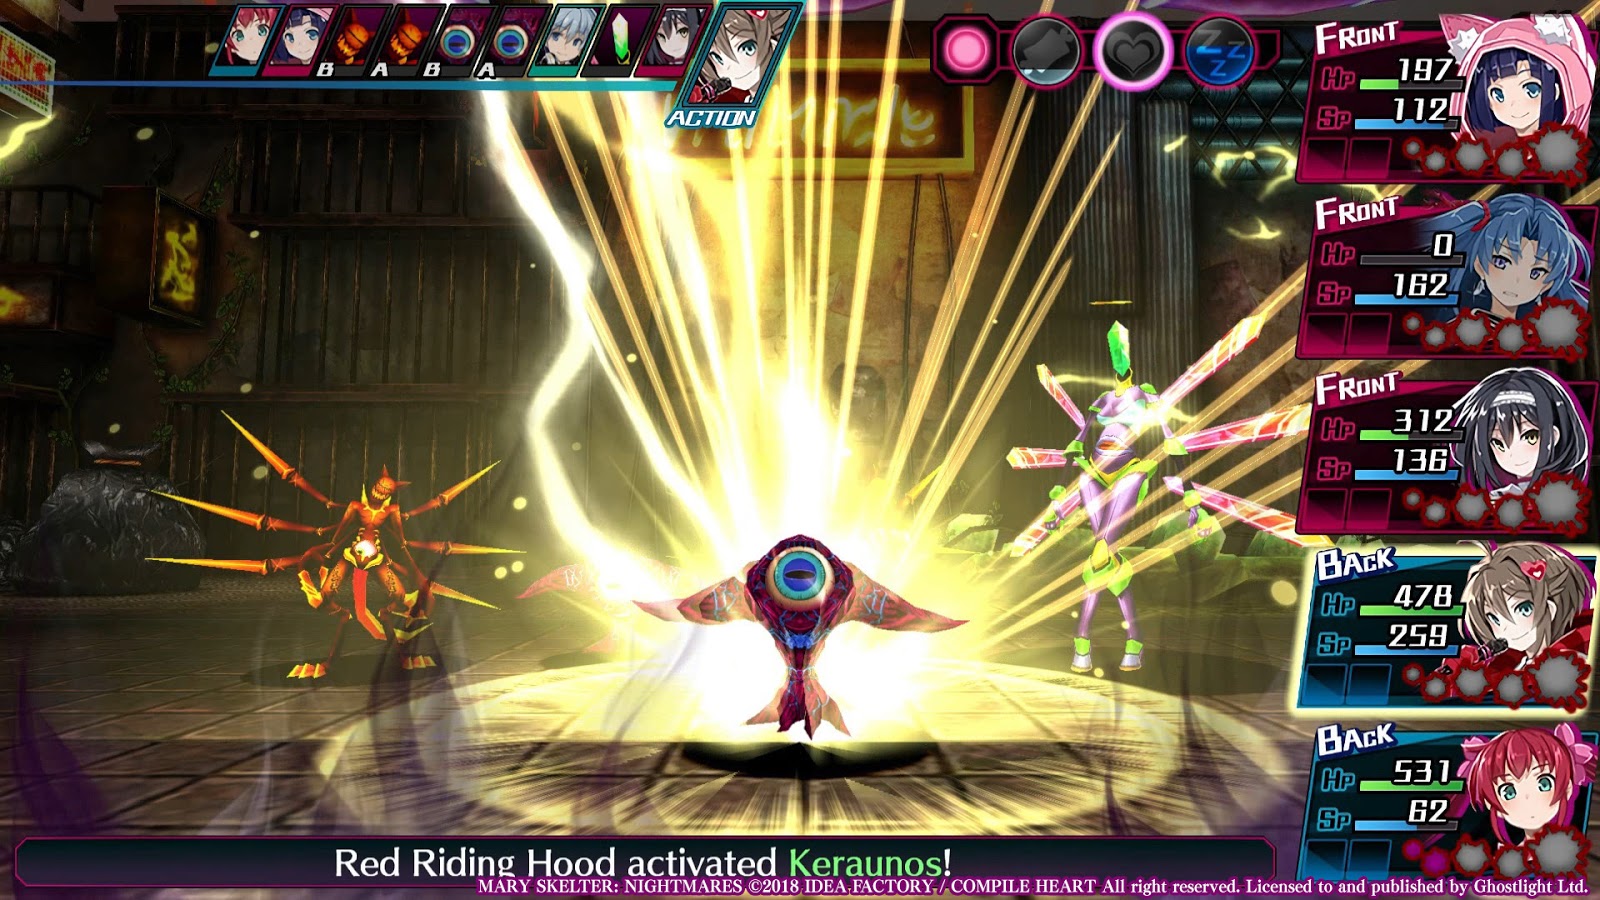 Mary Skelter: Nightmares Free Download